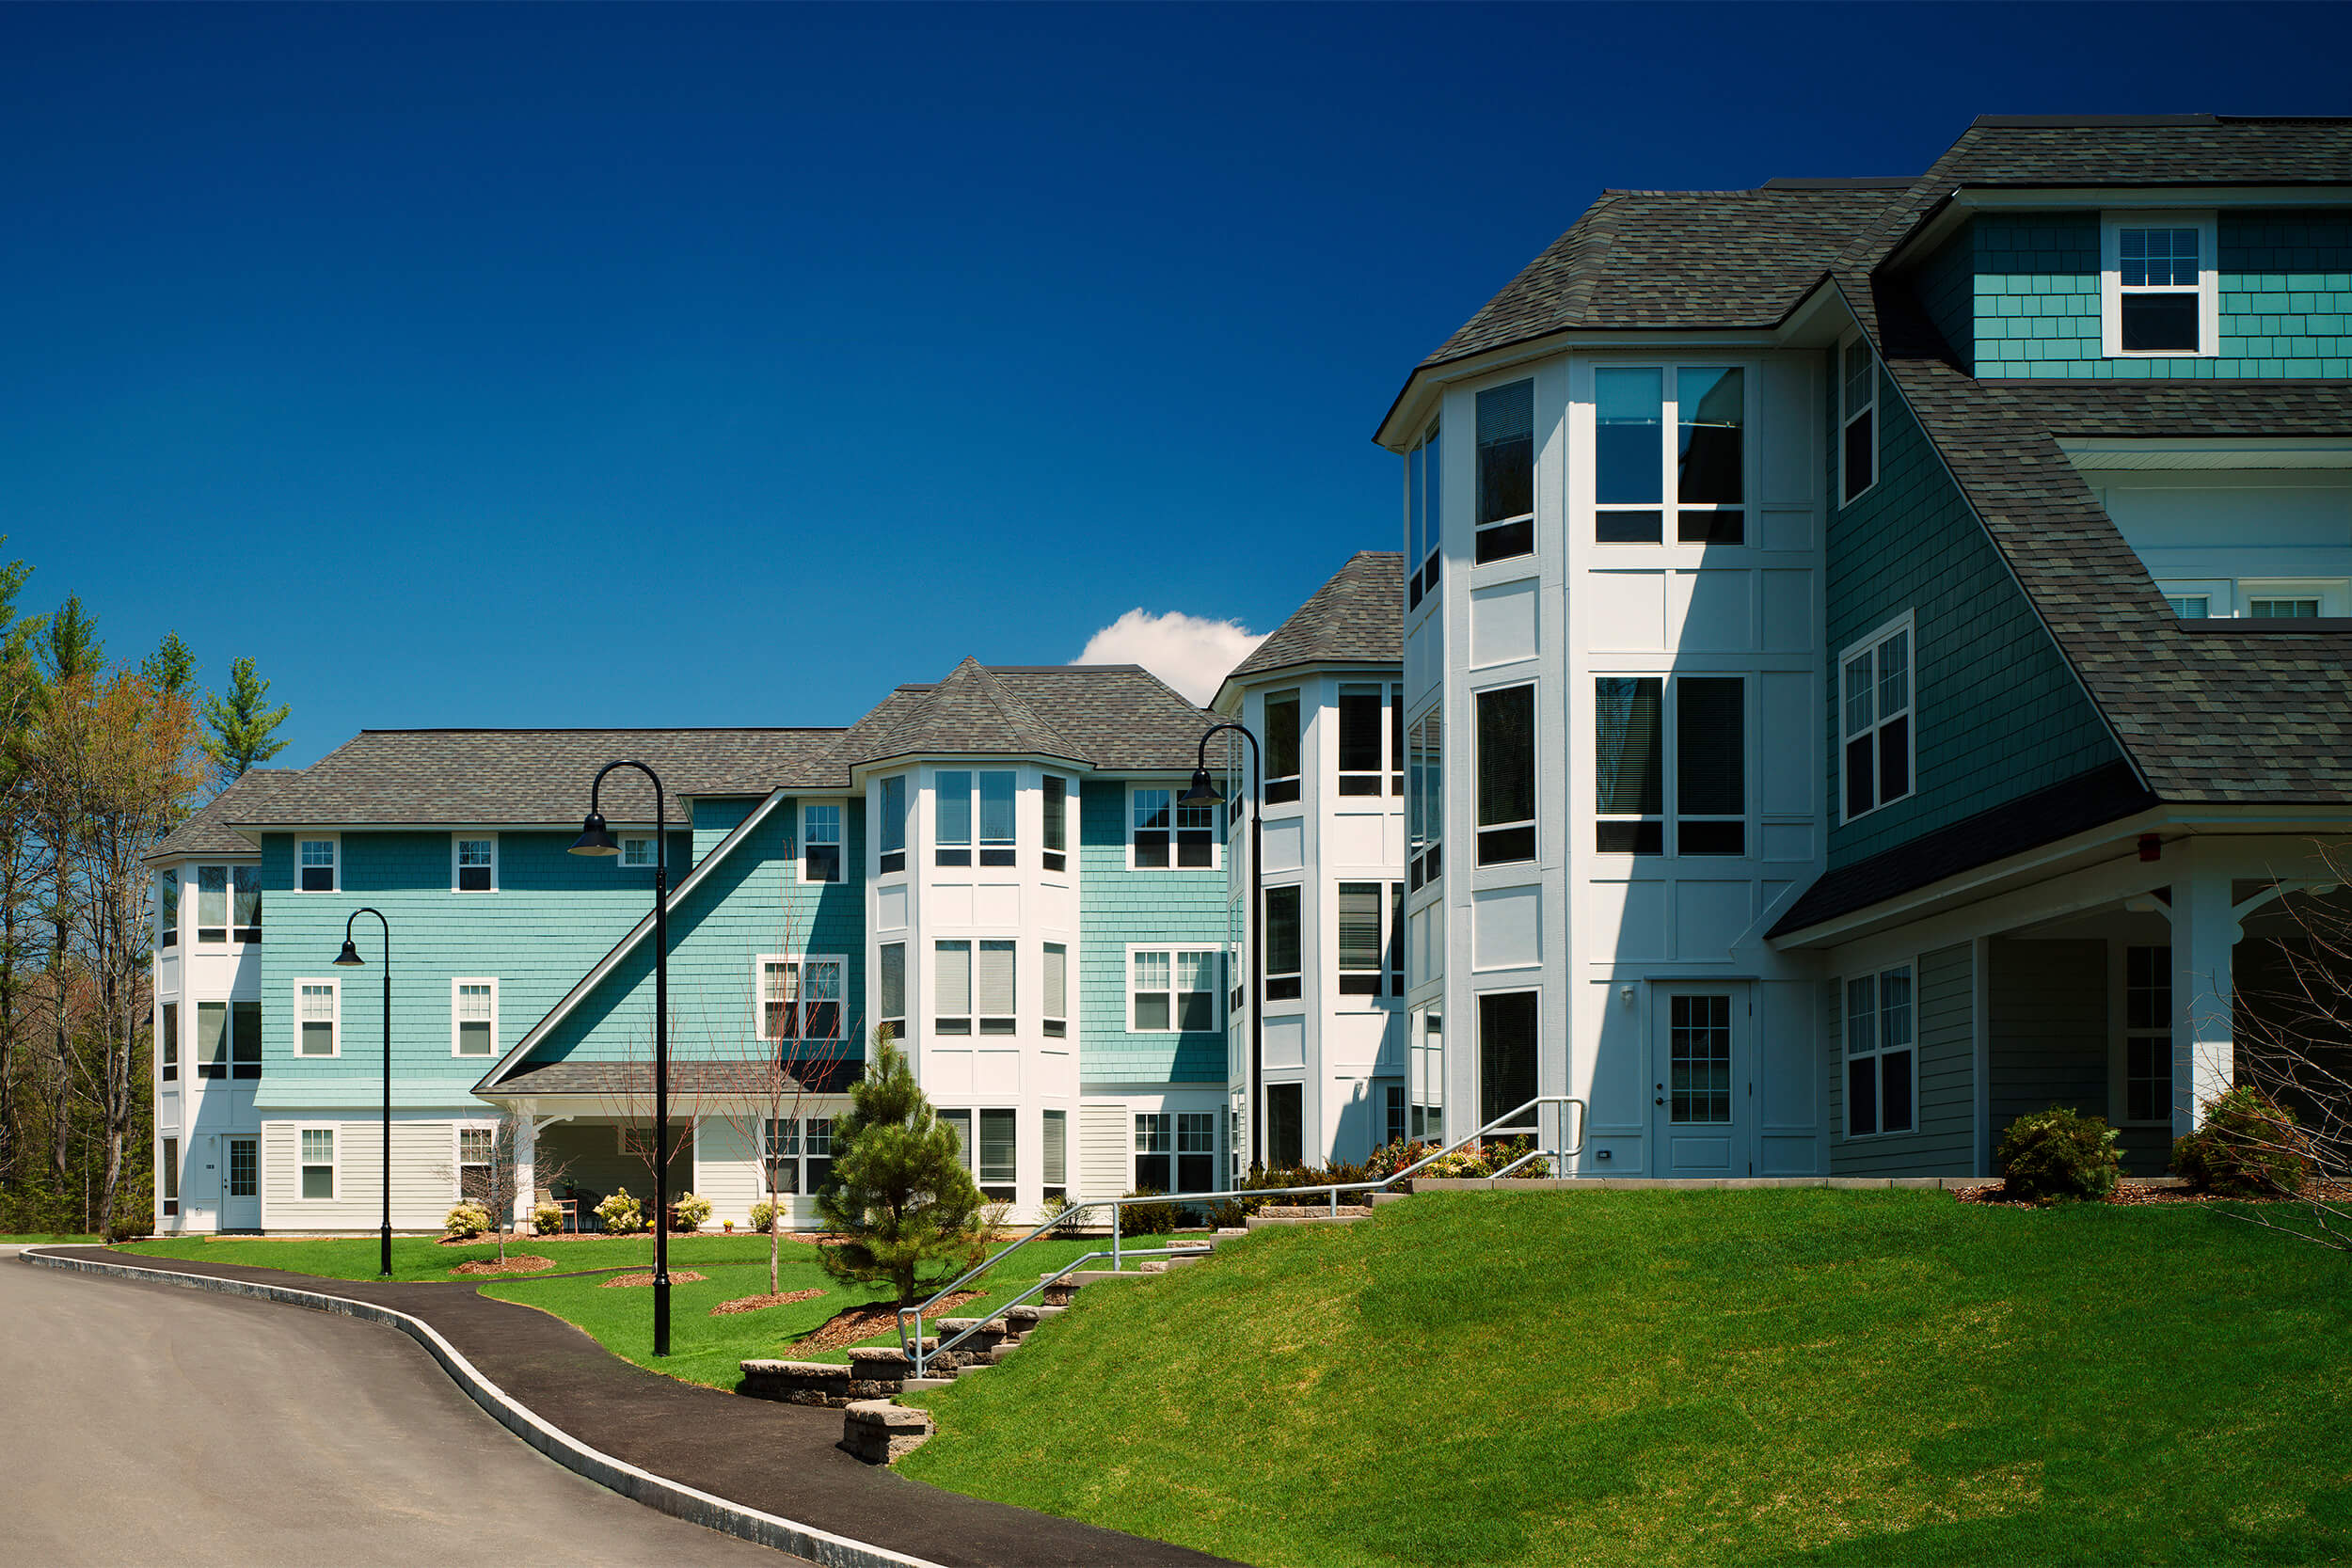 Exterior daytime photo of a senior living facility. The multi-unit buildings feature light blue siding with white trim accents, and grassy lawns.